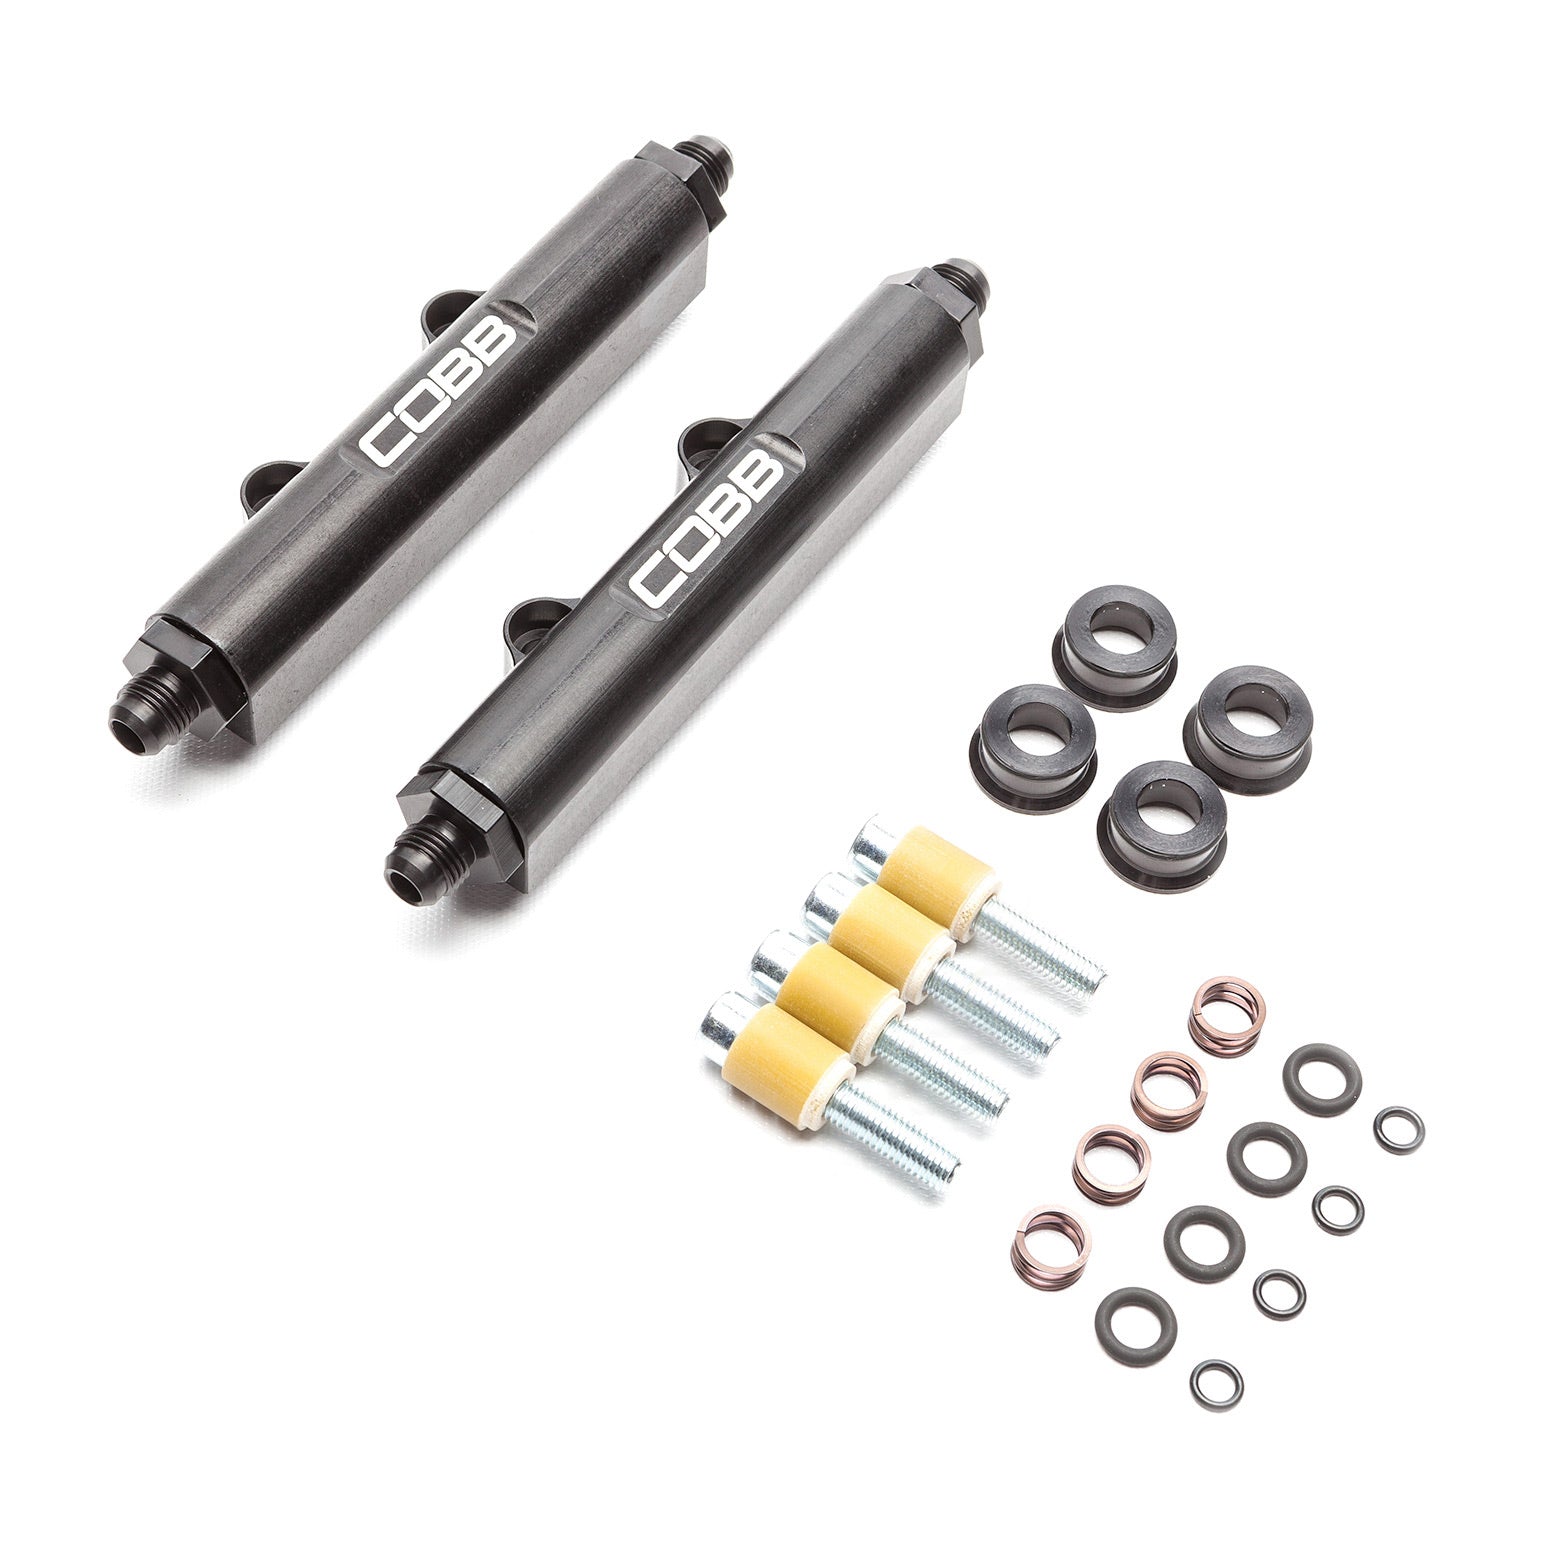 COBB 331260 SUBARU Side Feed to Top Feed Fuel Rail Conversion Kit with fittings STI 04-06, FXT 04-05, LGT 05-07 Photo-0 